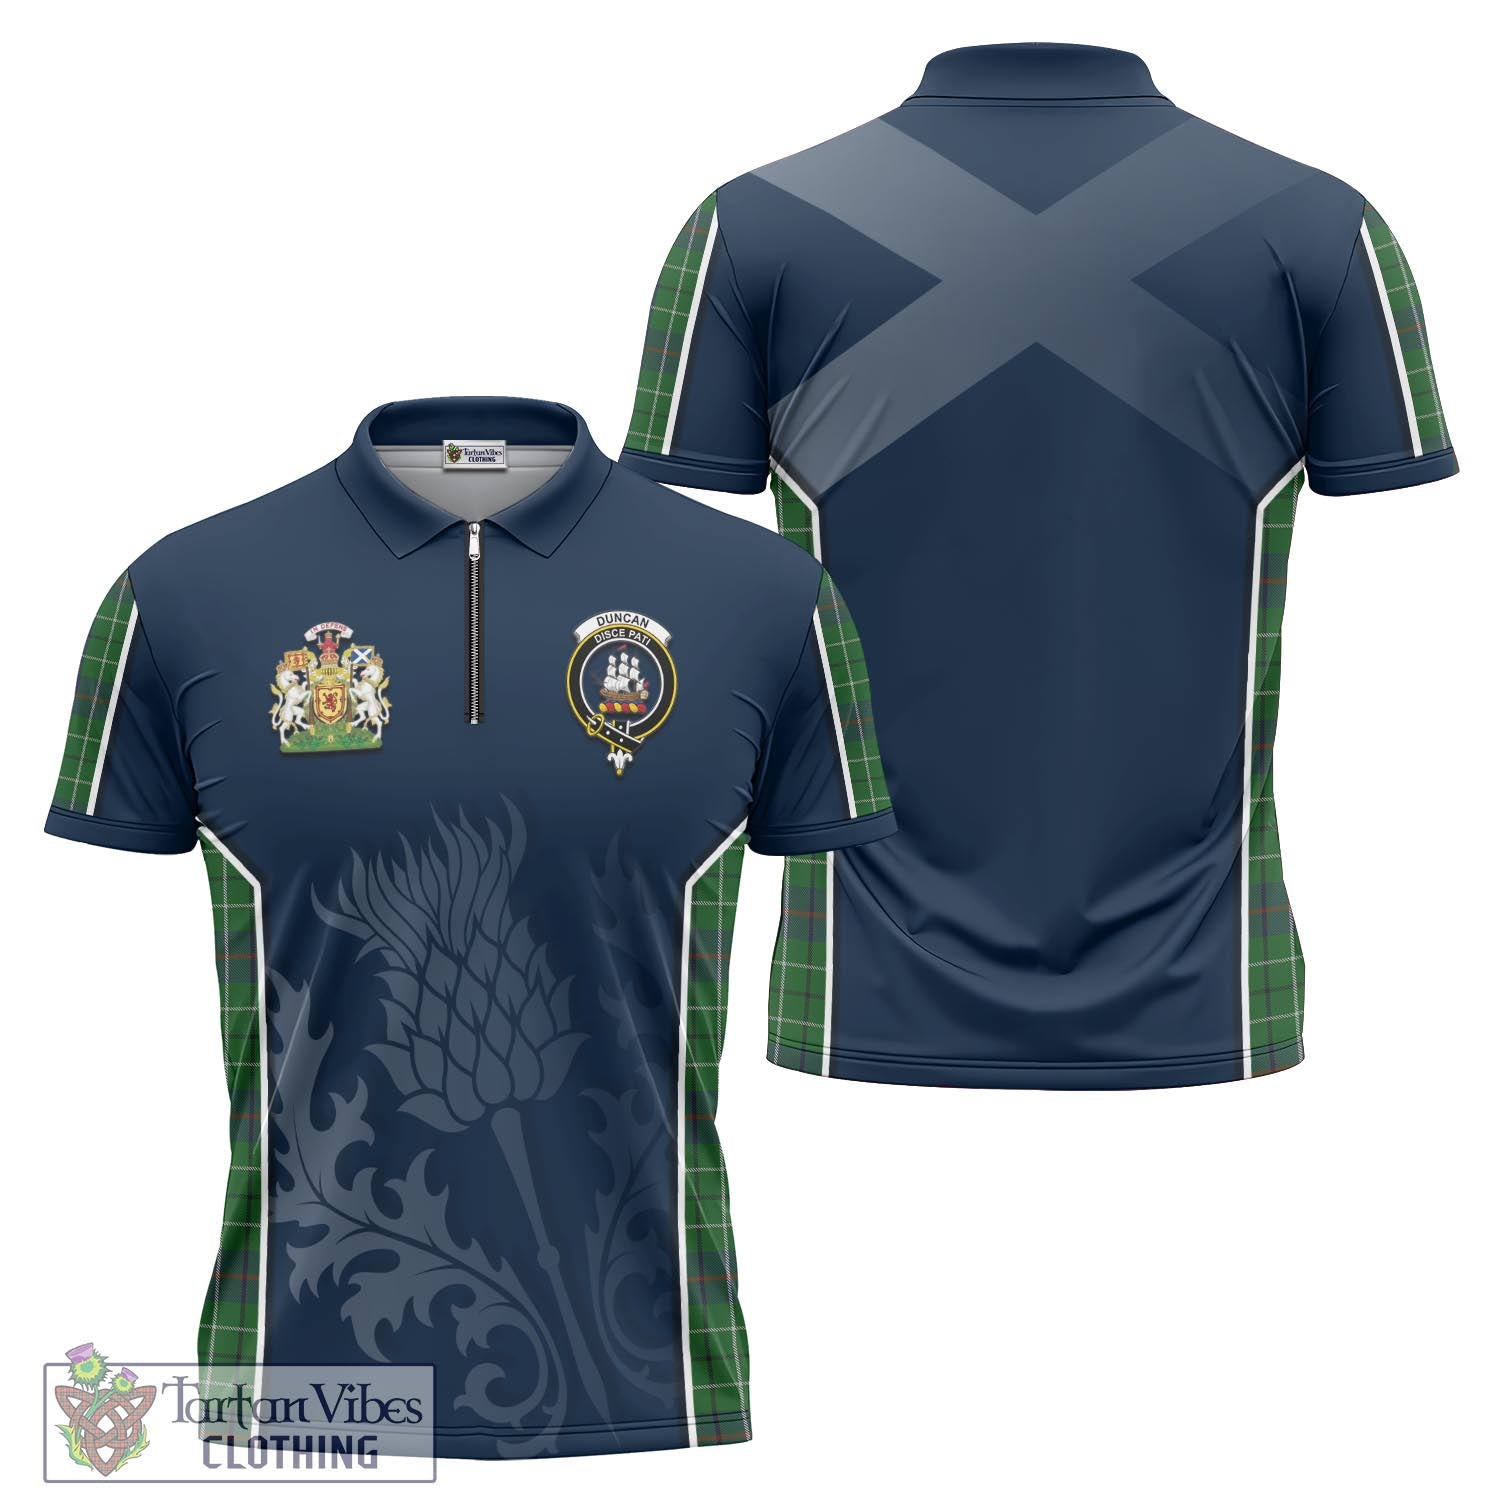 Tartan Vibes Clothing Duncan Tartan Zipper Polo Shirt with Family Crest and Scottish Thistle Vibes Sport Style